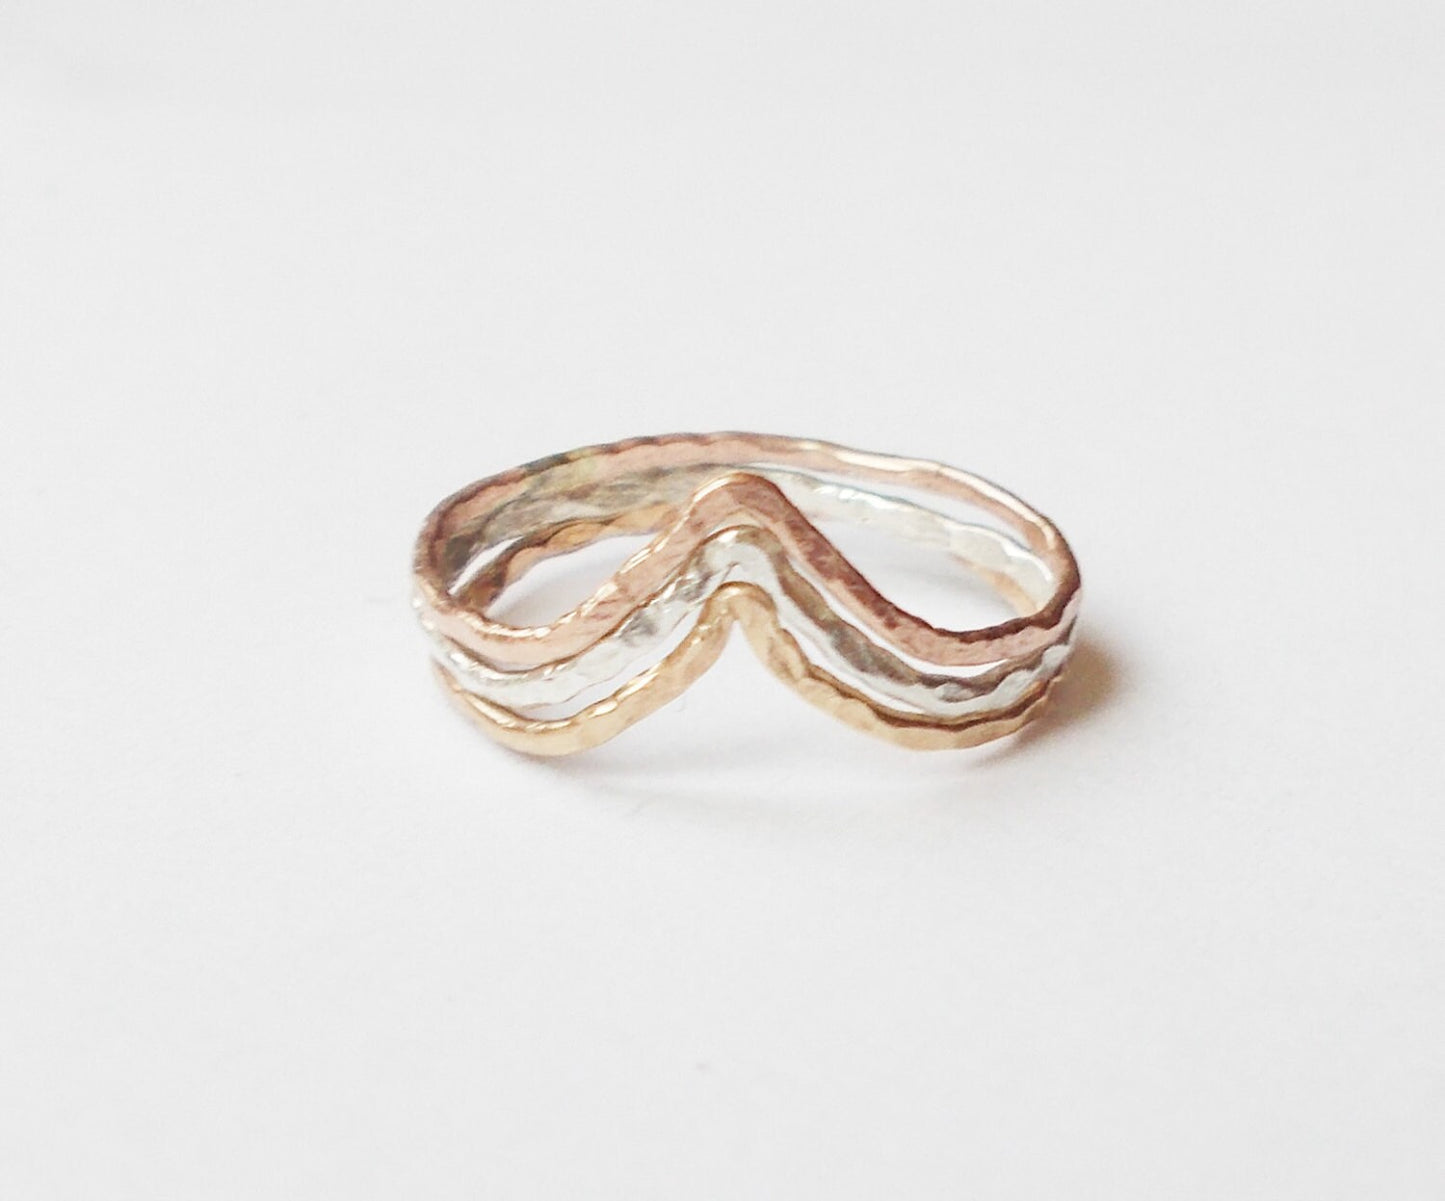 Tri Color Chevron Stacking Rings - Sterling Silver, Rose Gold Filled, and Gold Filled -  Three Tone Rings - Set of 3